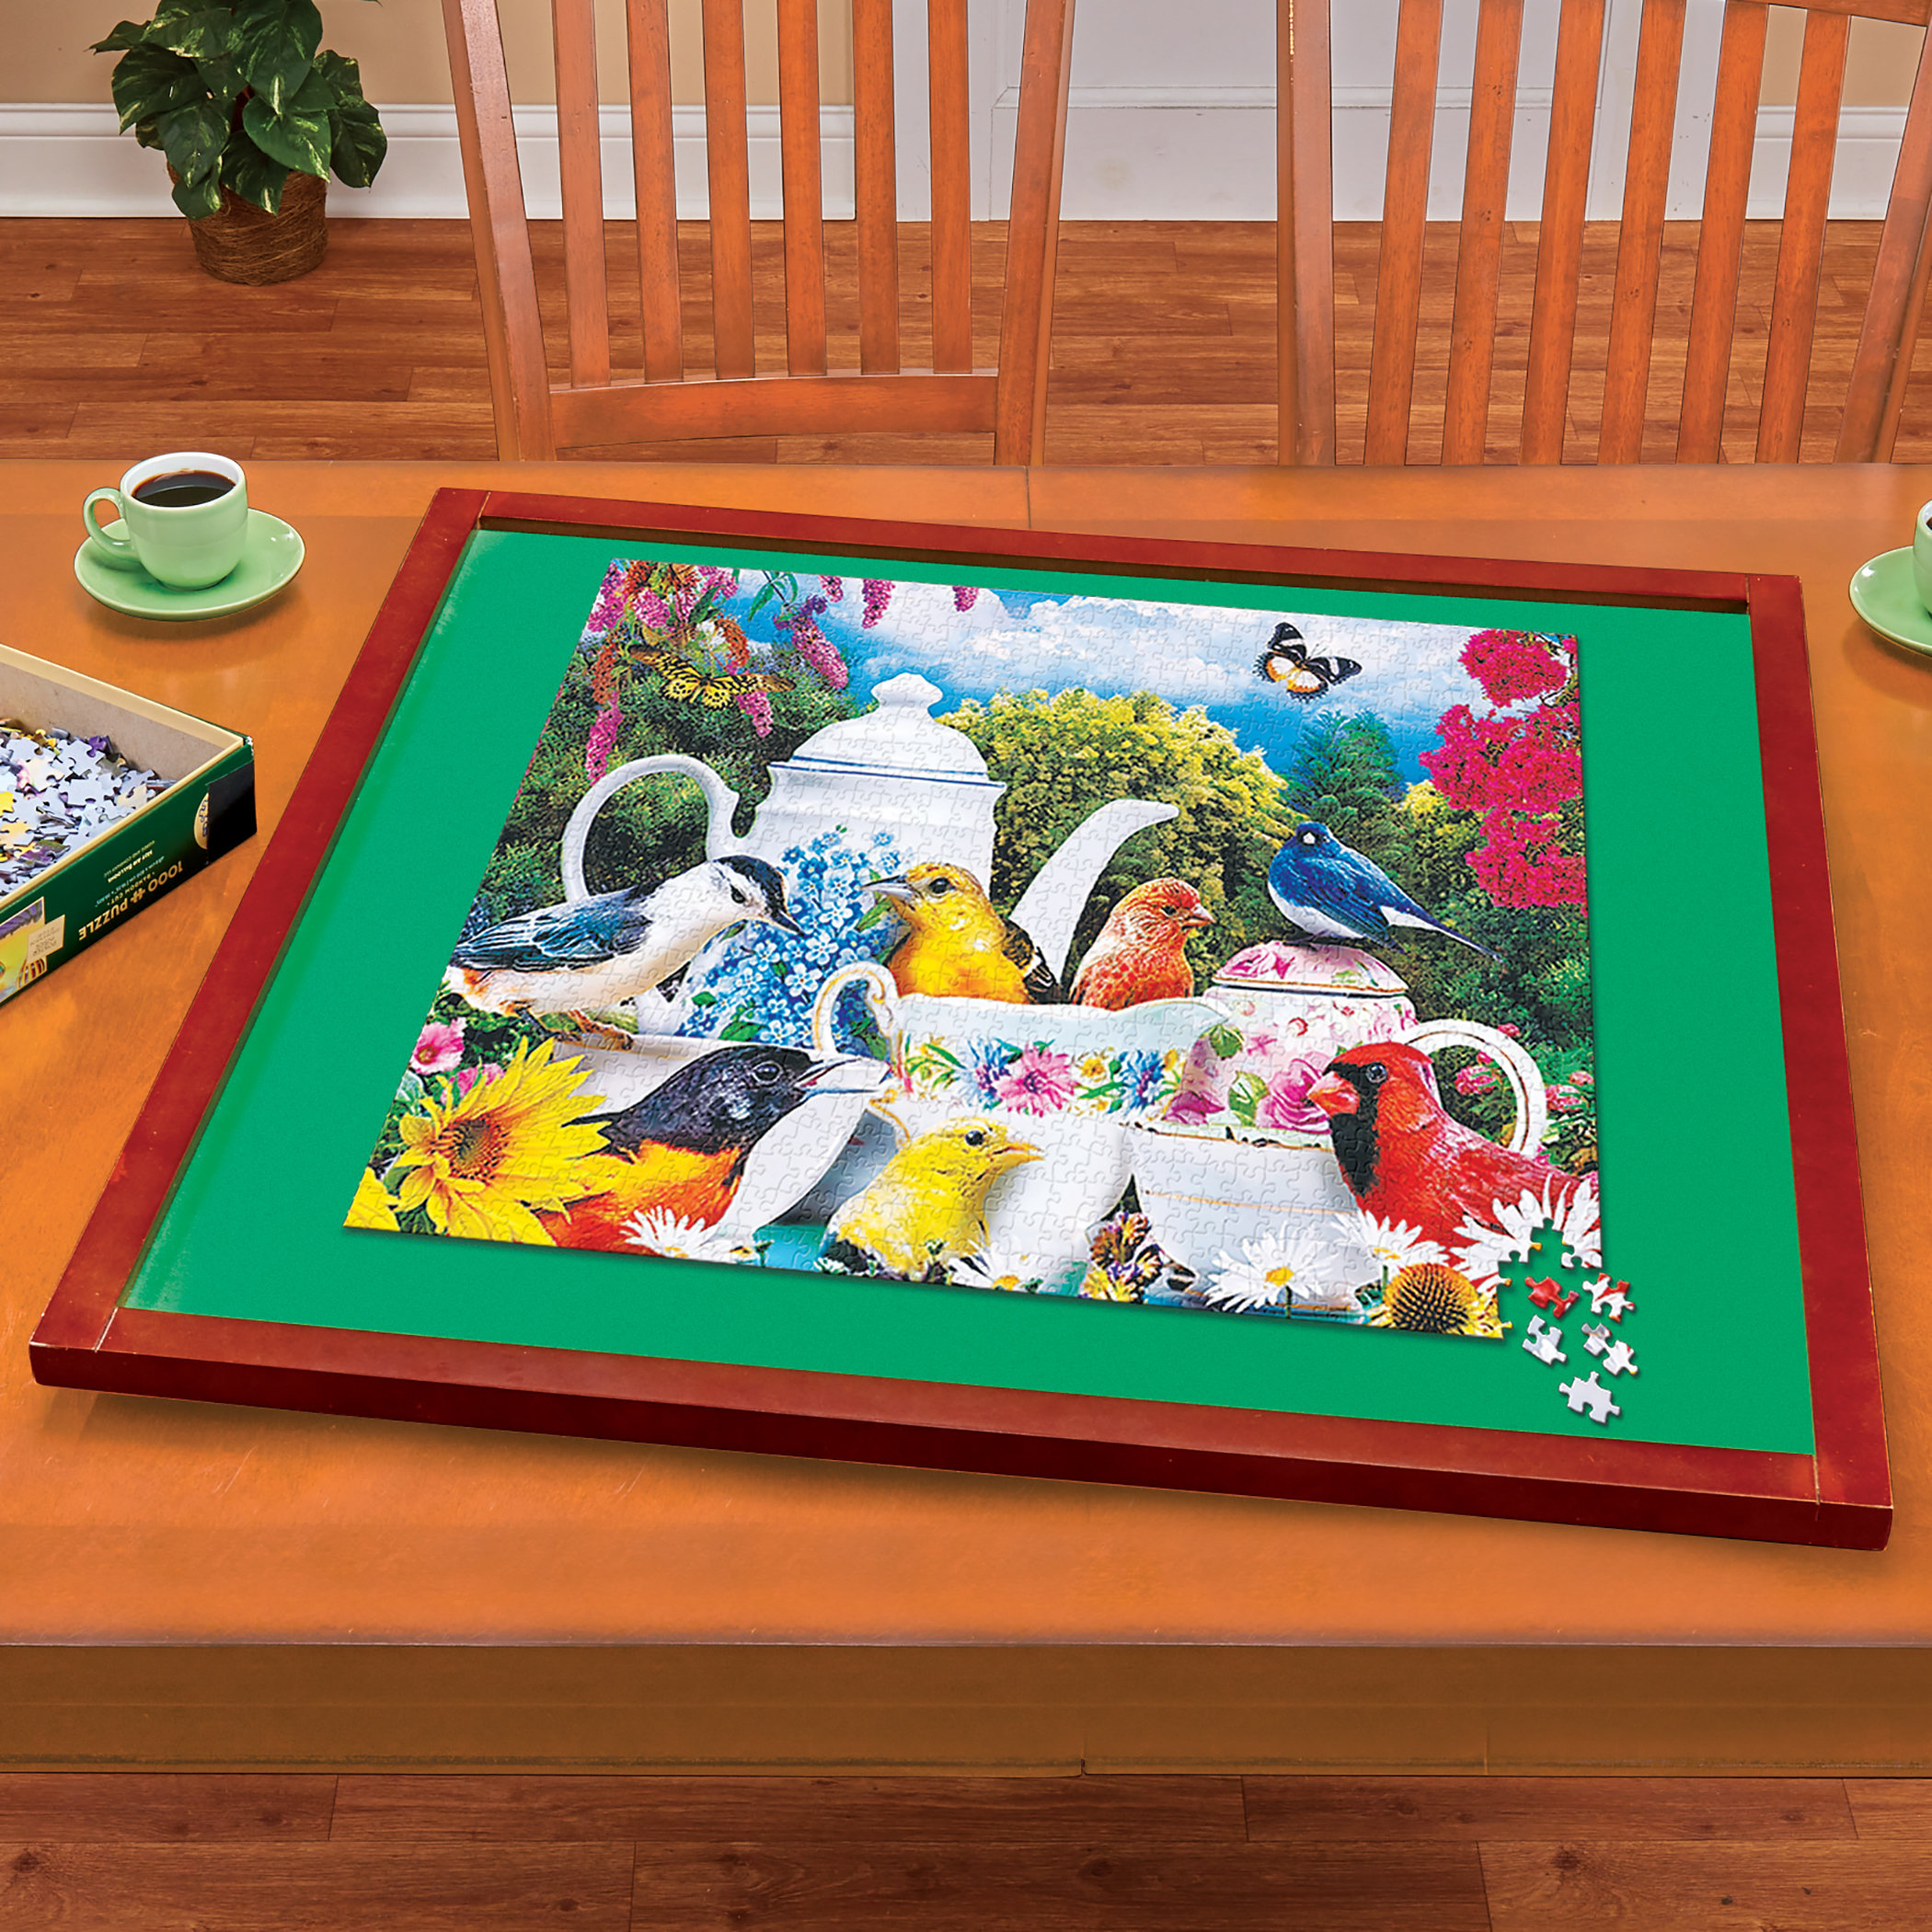 Bits and Pieces - Puzzle Expert Tabletop Easel - Non-Slip Felt Work Surface  Puzzle Table Accessory to Put Together Your Jigsaws